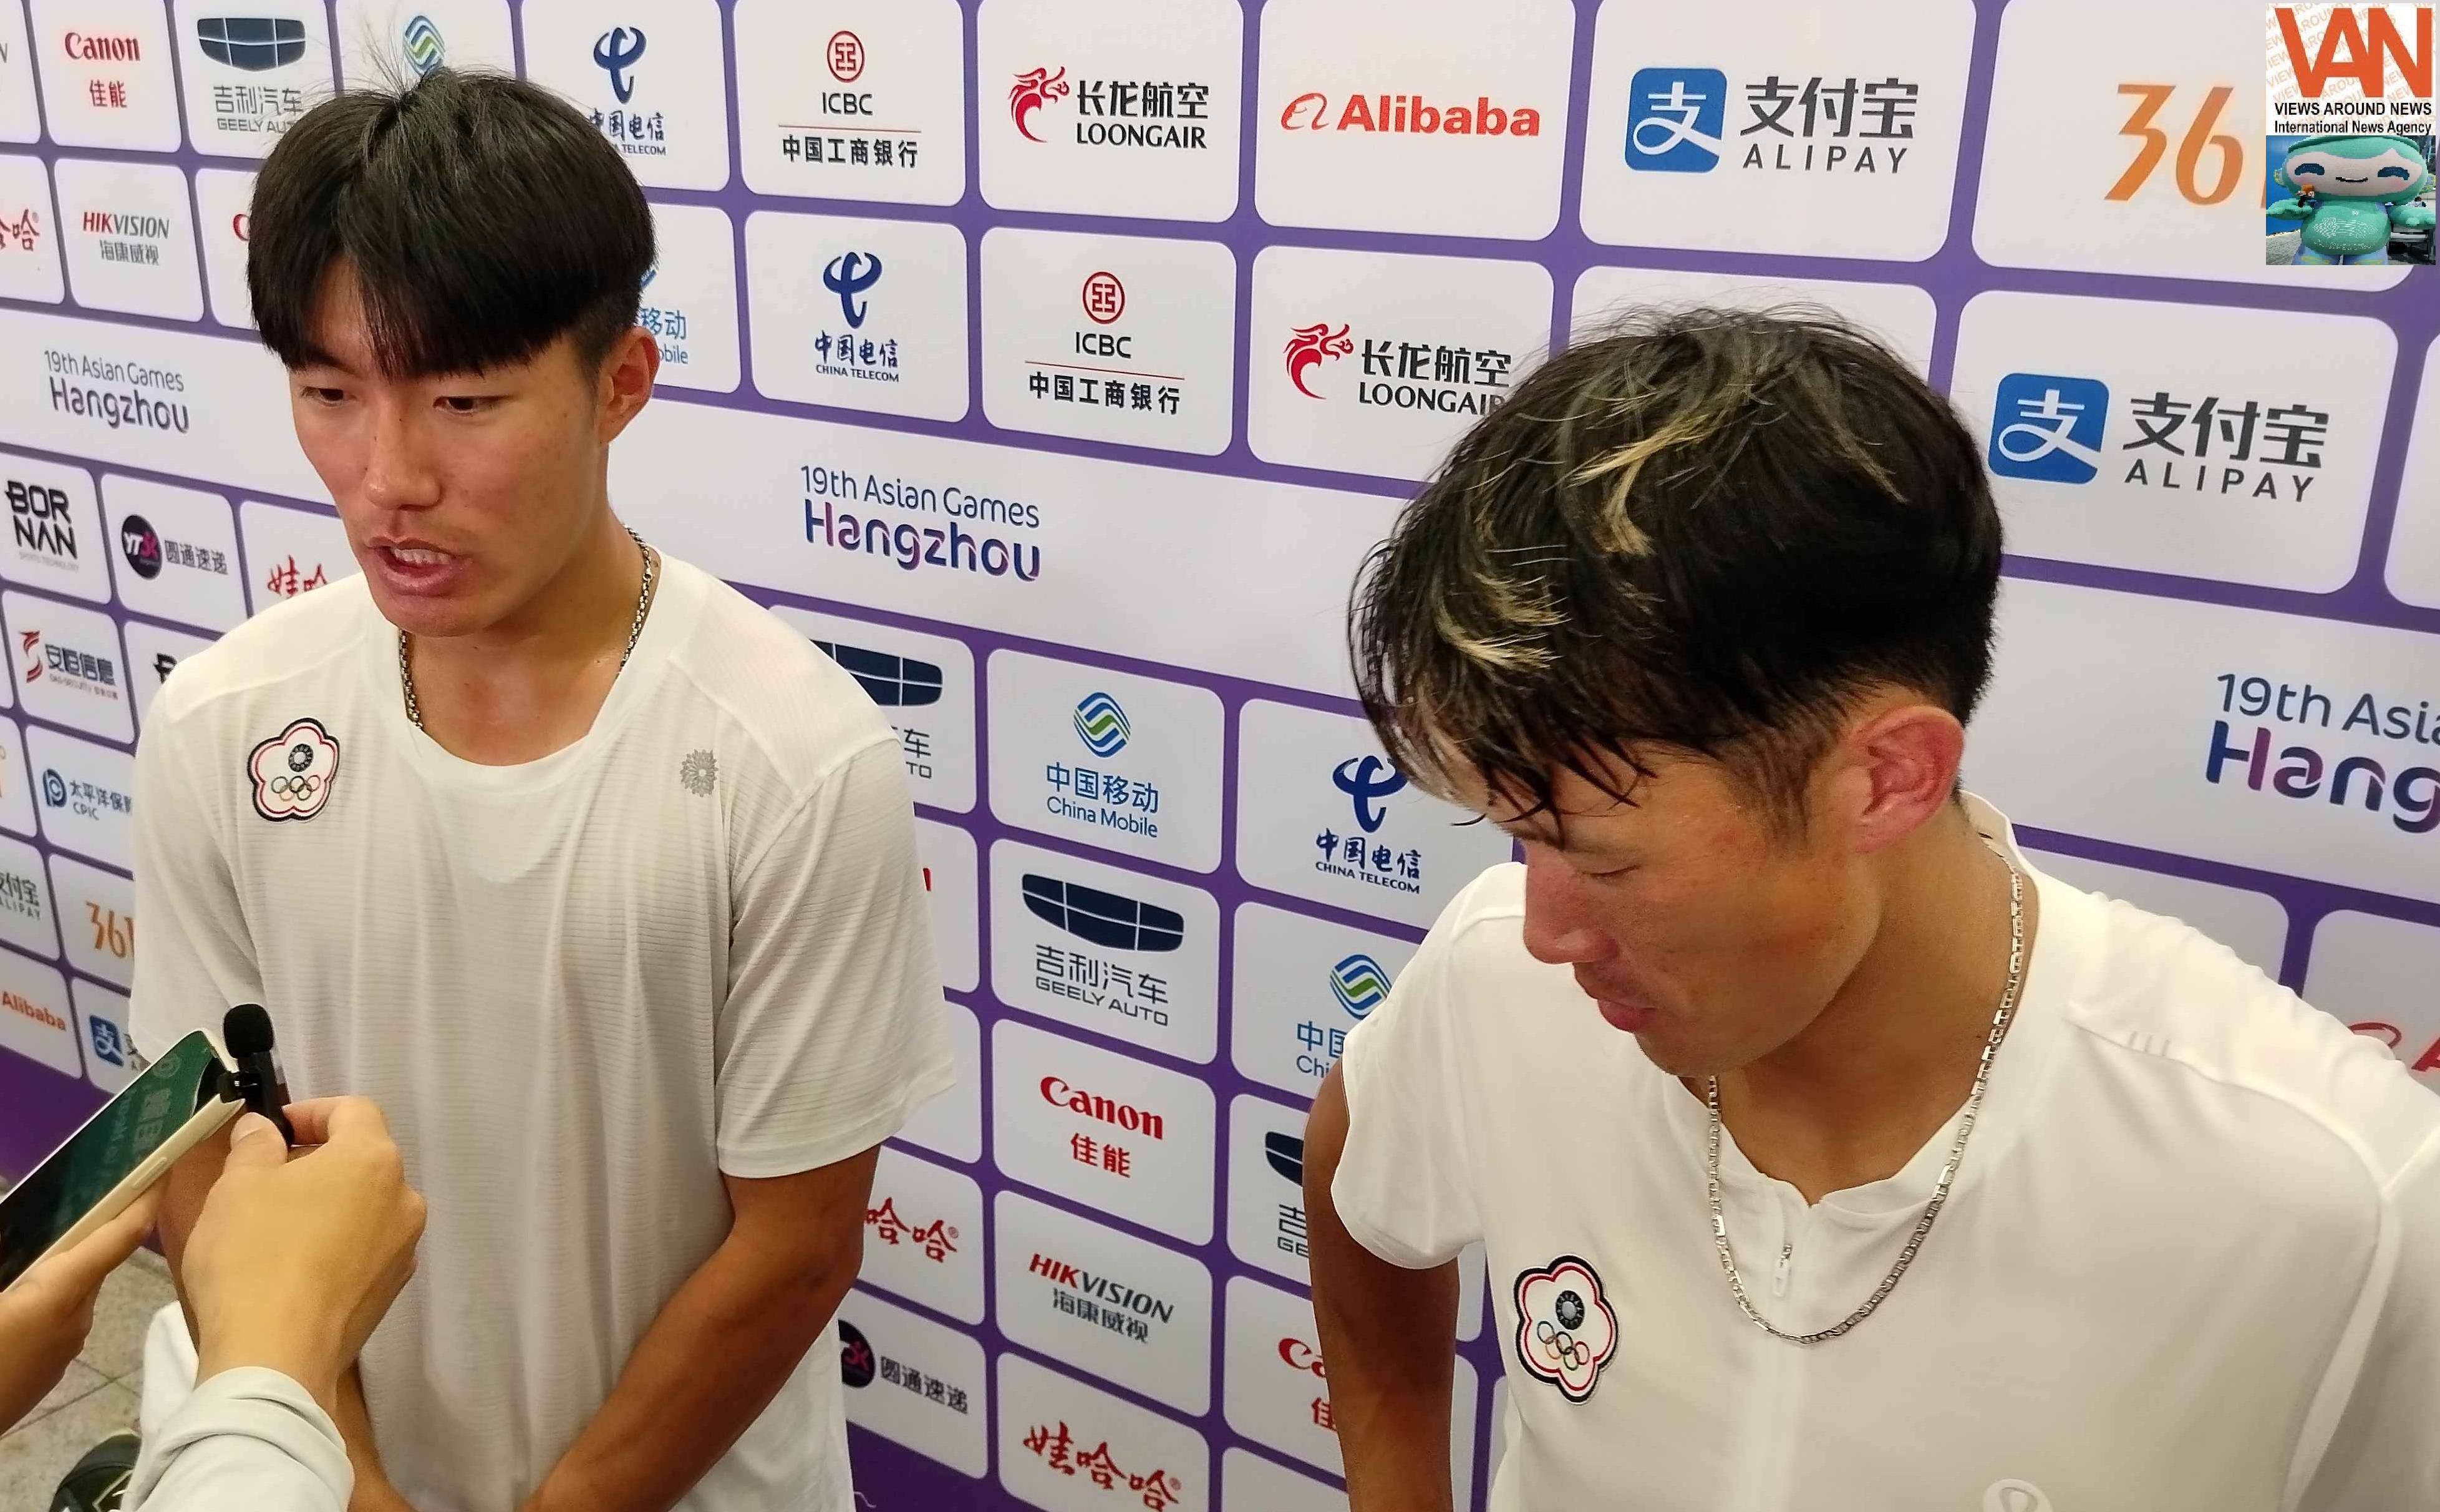 Chinese Taipei duos were happy after grabbed the m